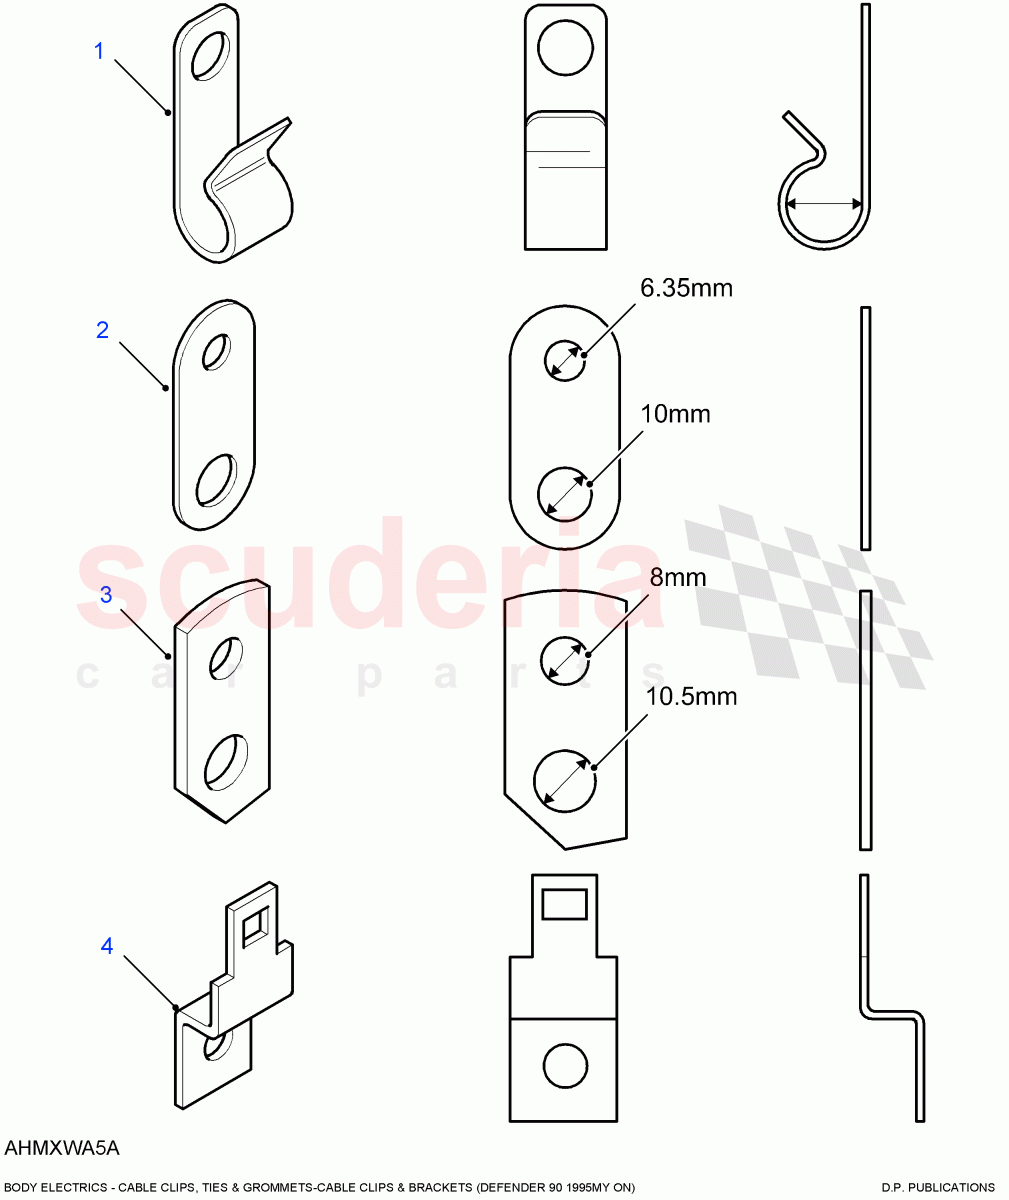 Cable Clips & Brackets((V)FROM7A000001) of Land Rover Land Rover Defender (2007-2016)